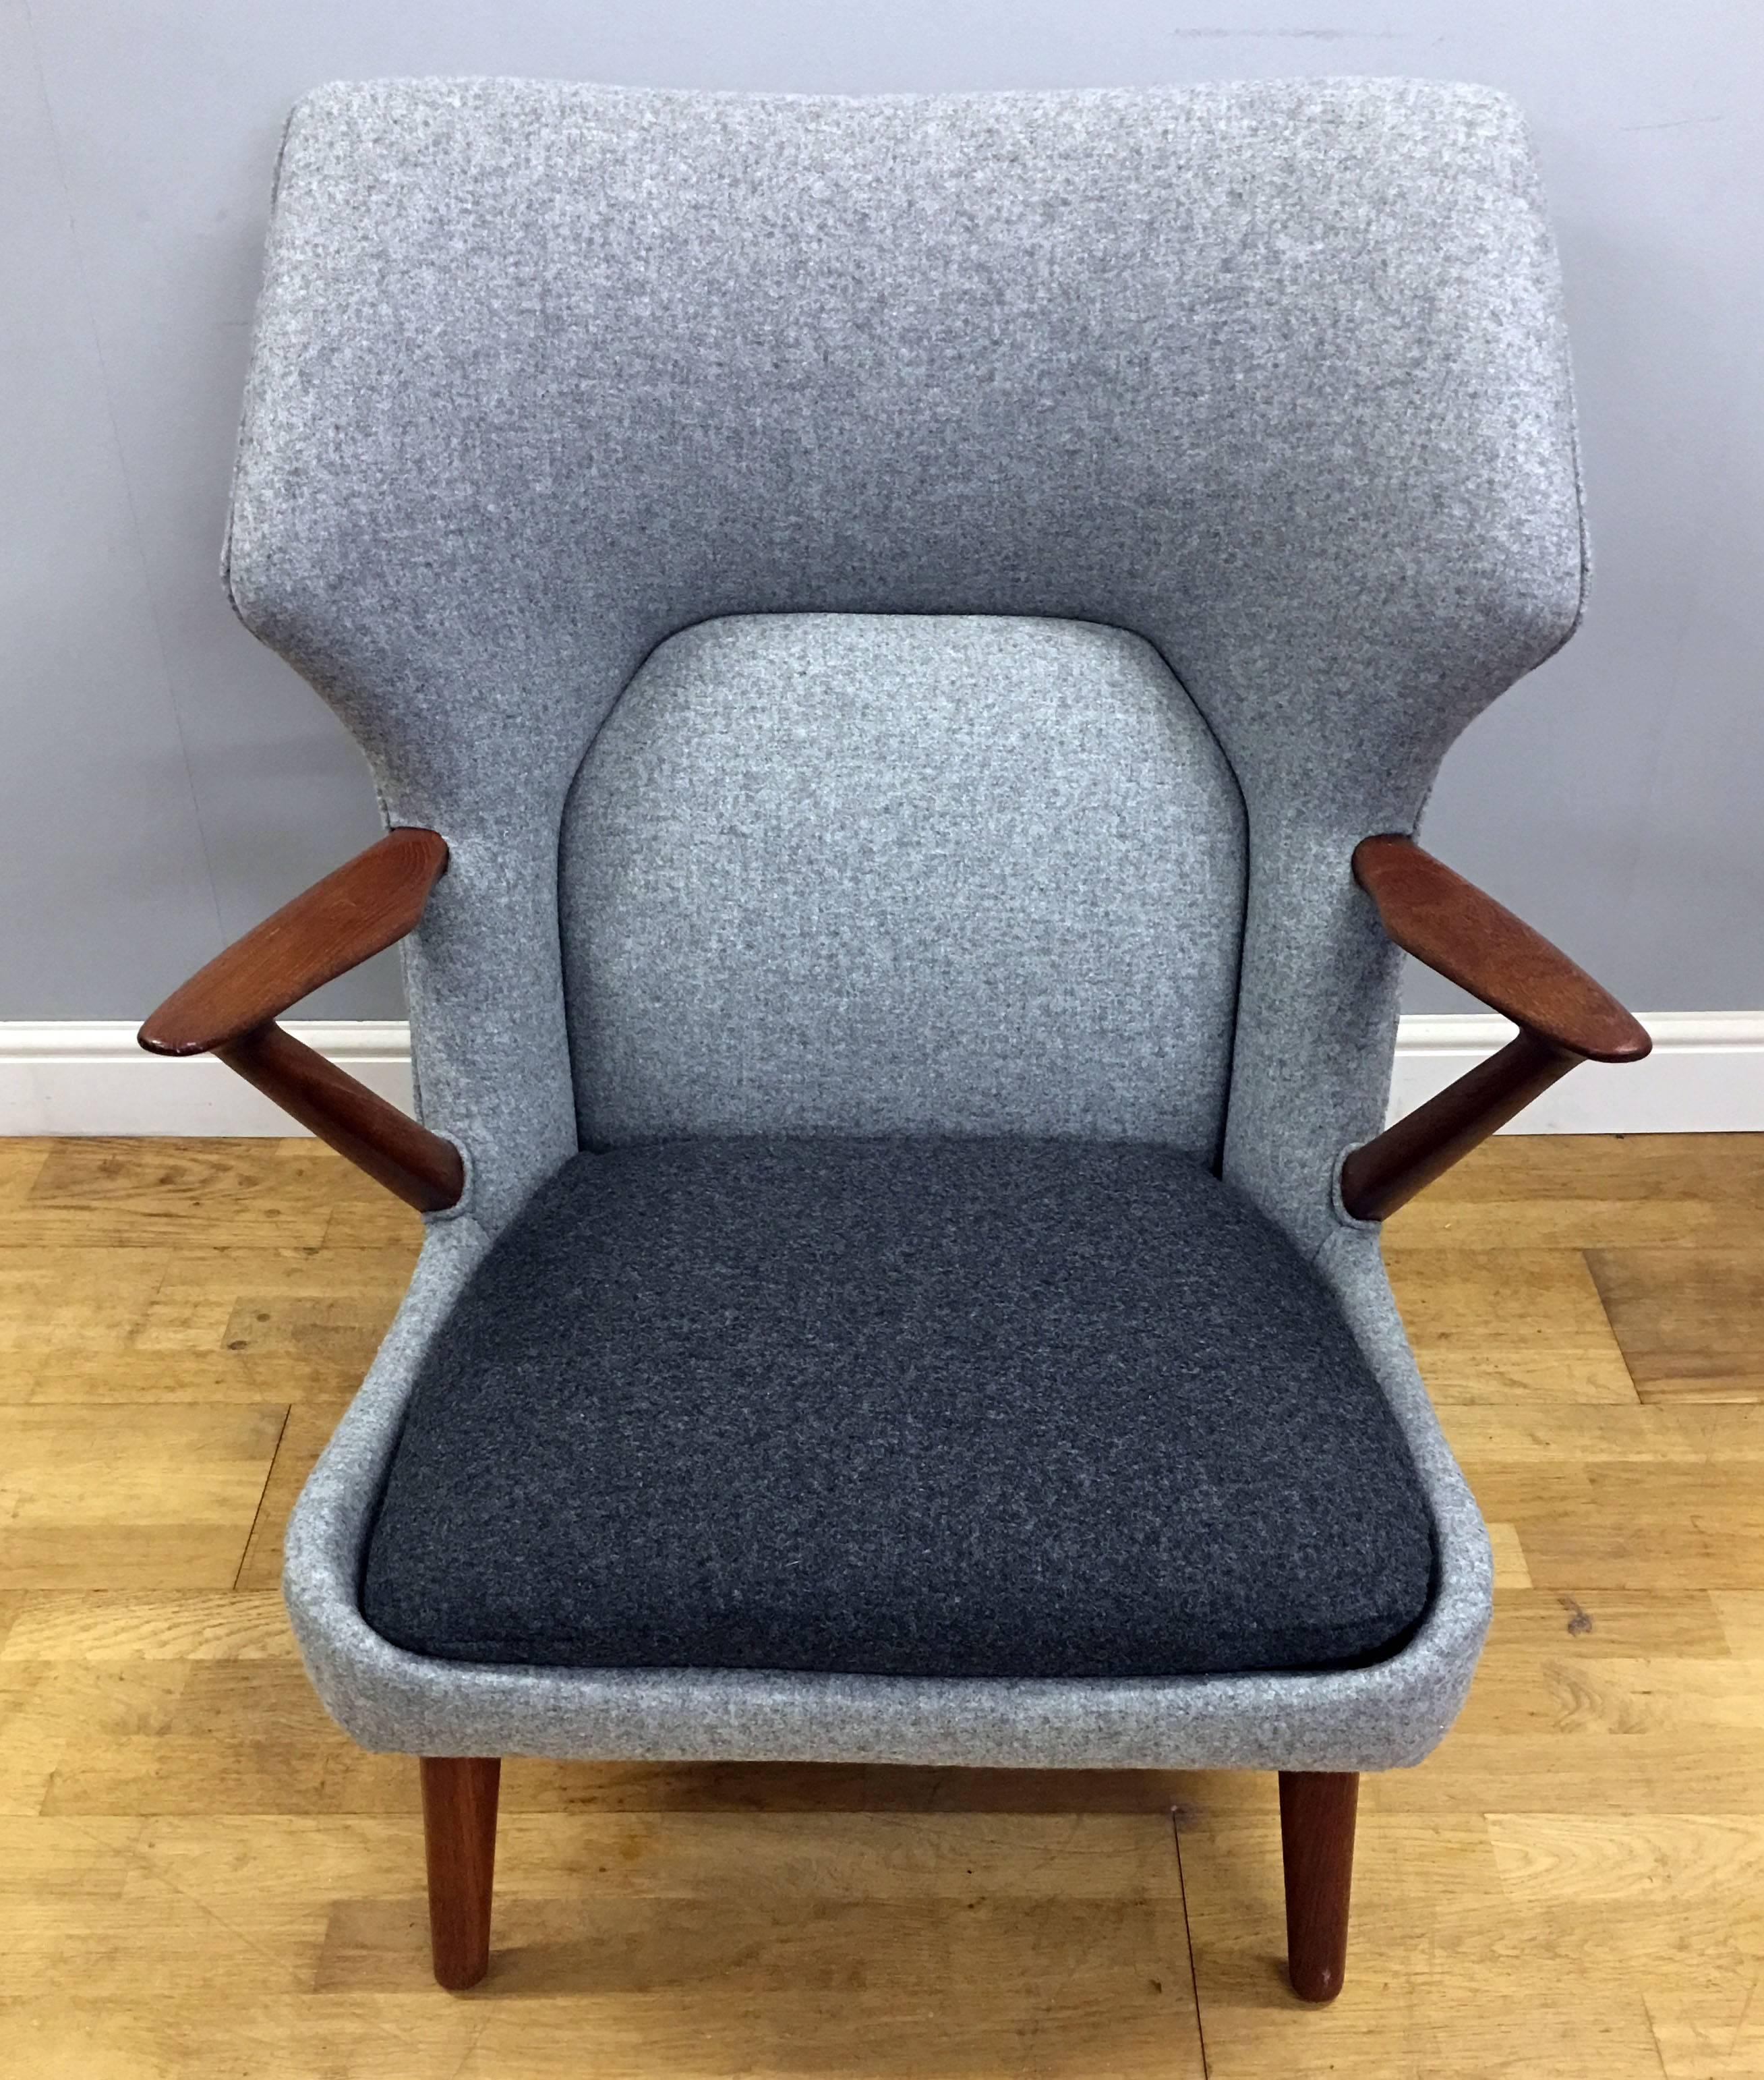 A beautiful early example, freshly reupholstered in finest quality wool fabric, as closely as possible to the original color scheme of two shades of grey.